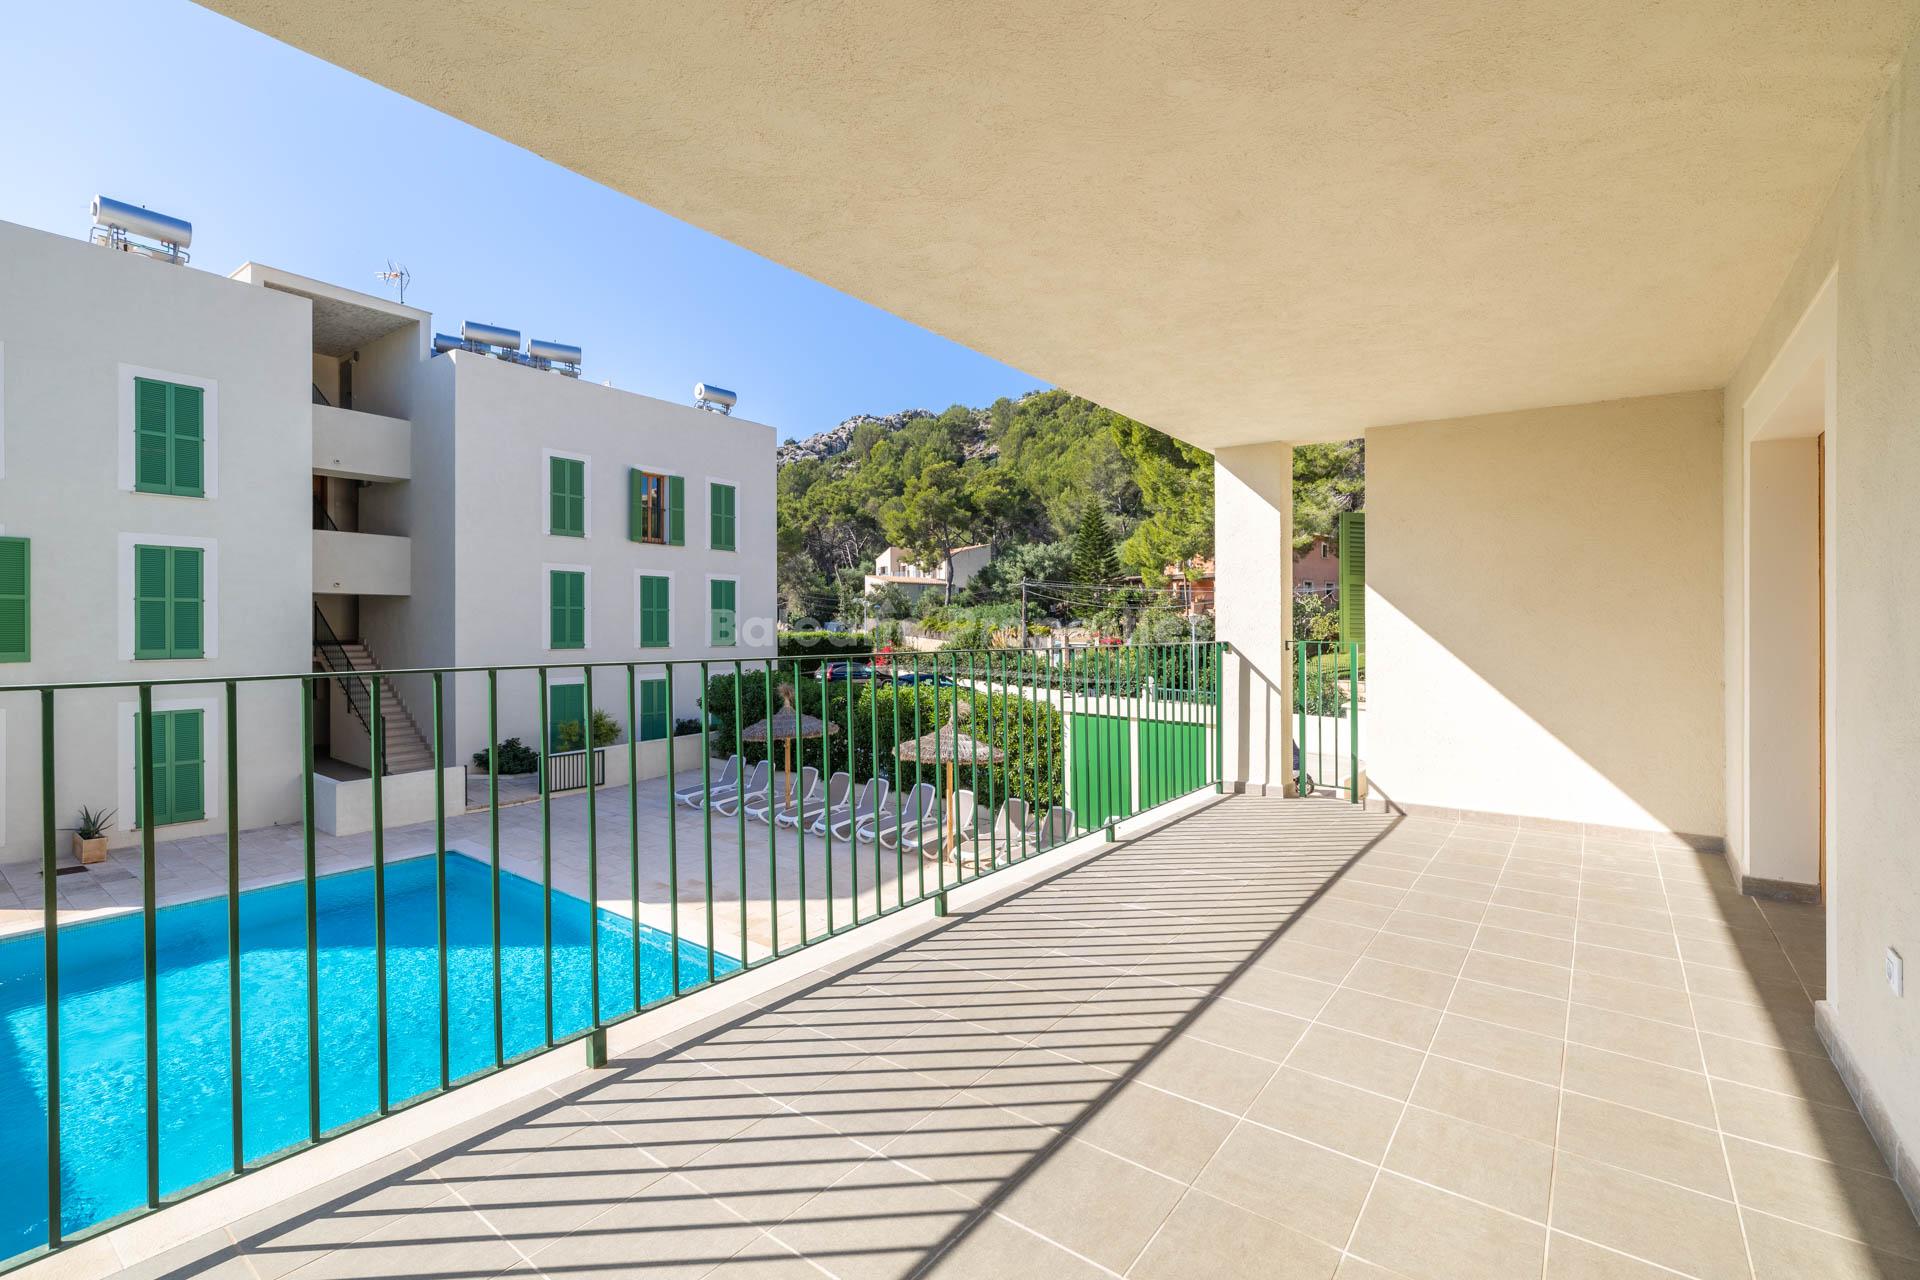 Apartments with community pool for sale in Puerto Pollensa, Mallorca